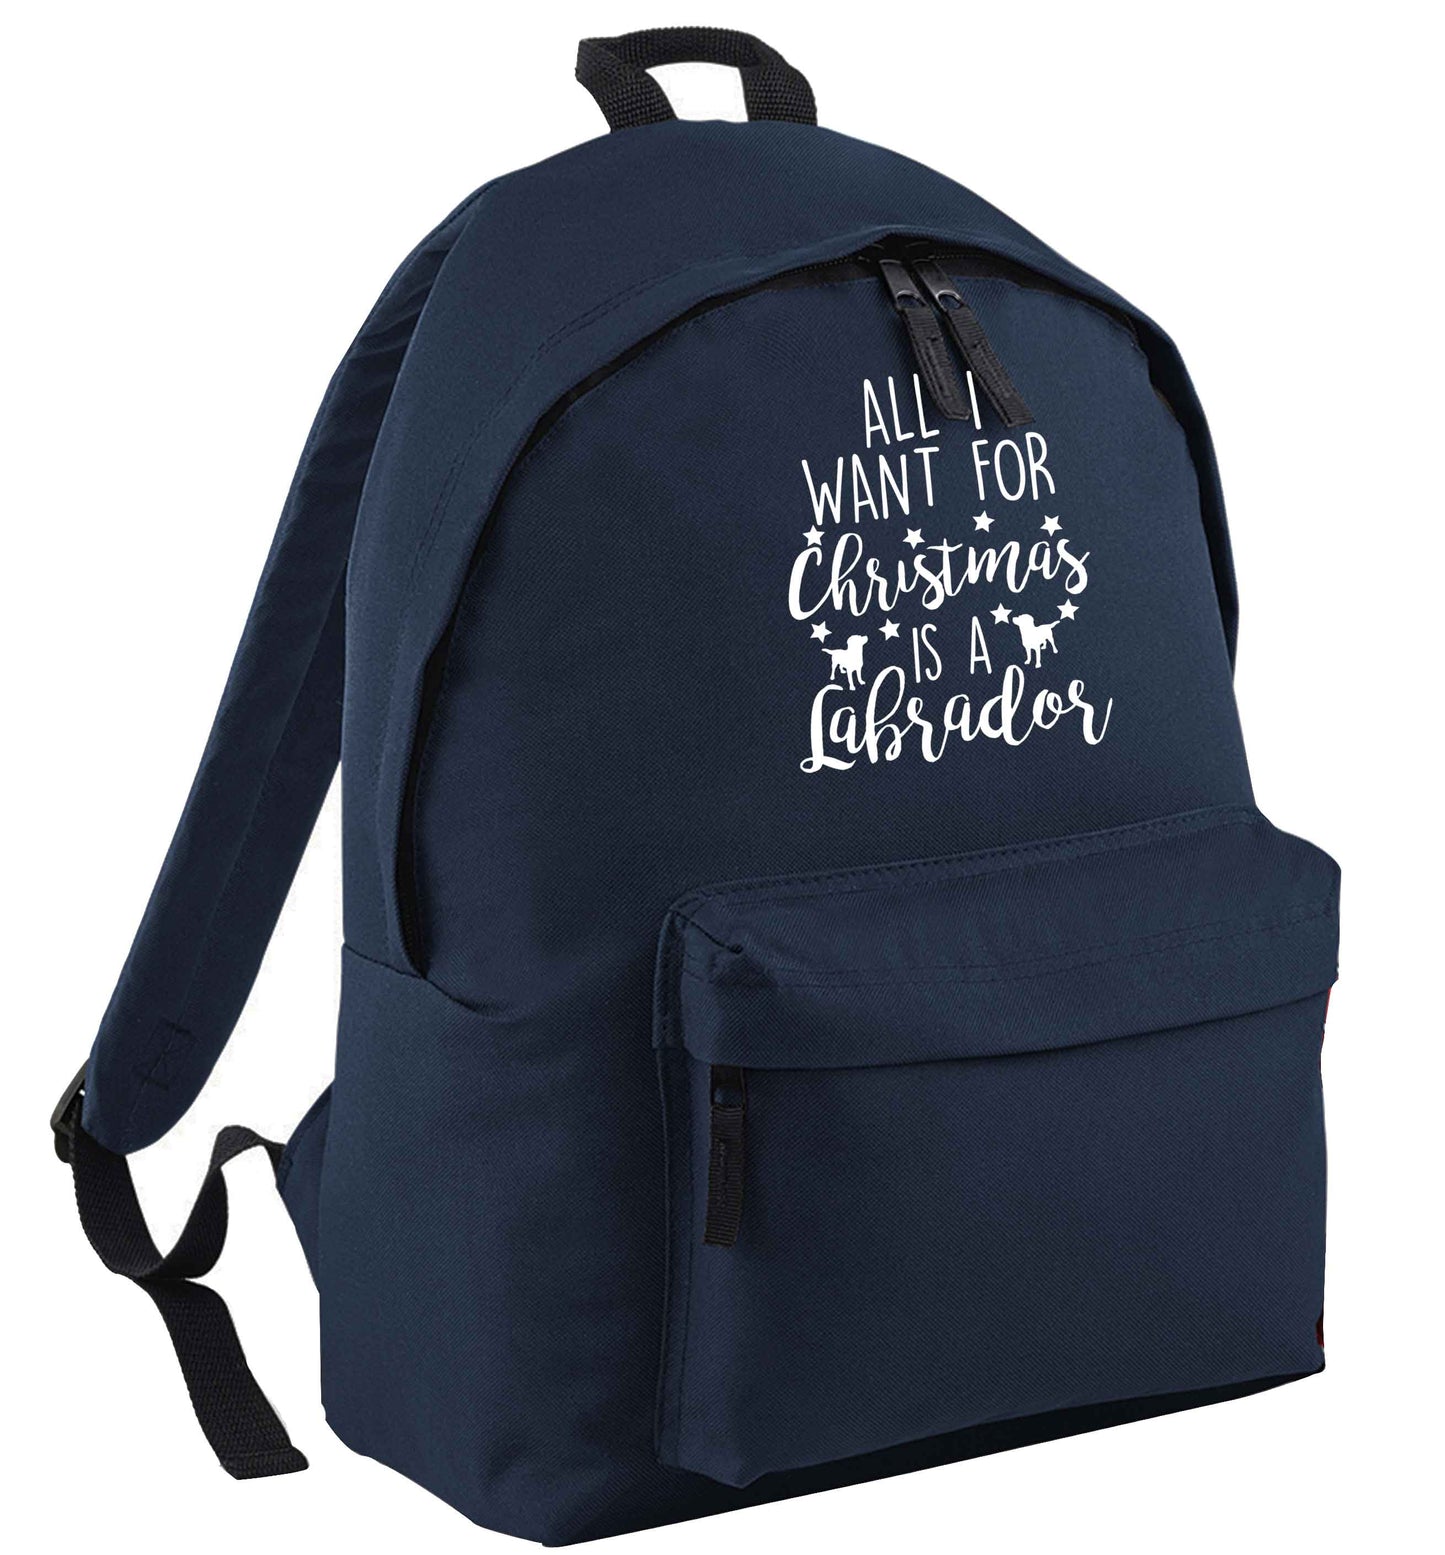 All I want for Christmas is a labrador navy adults backpack